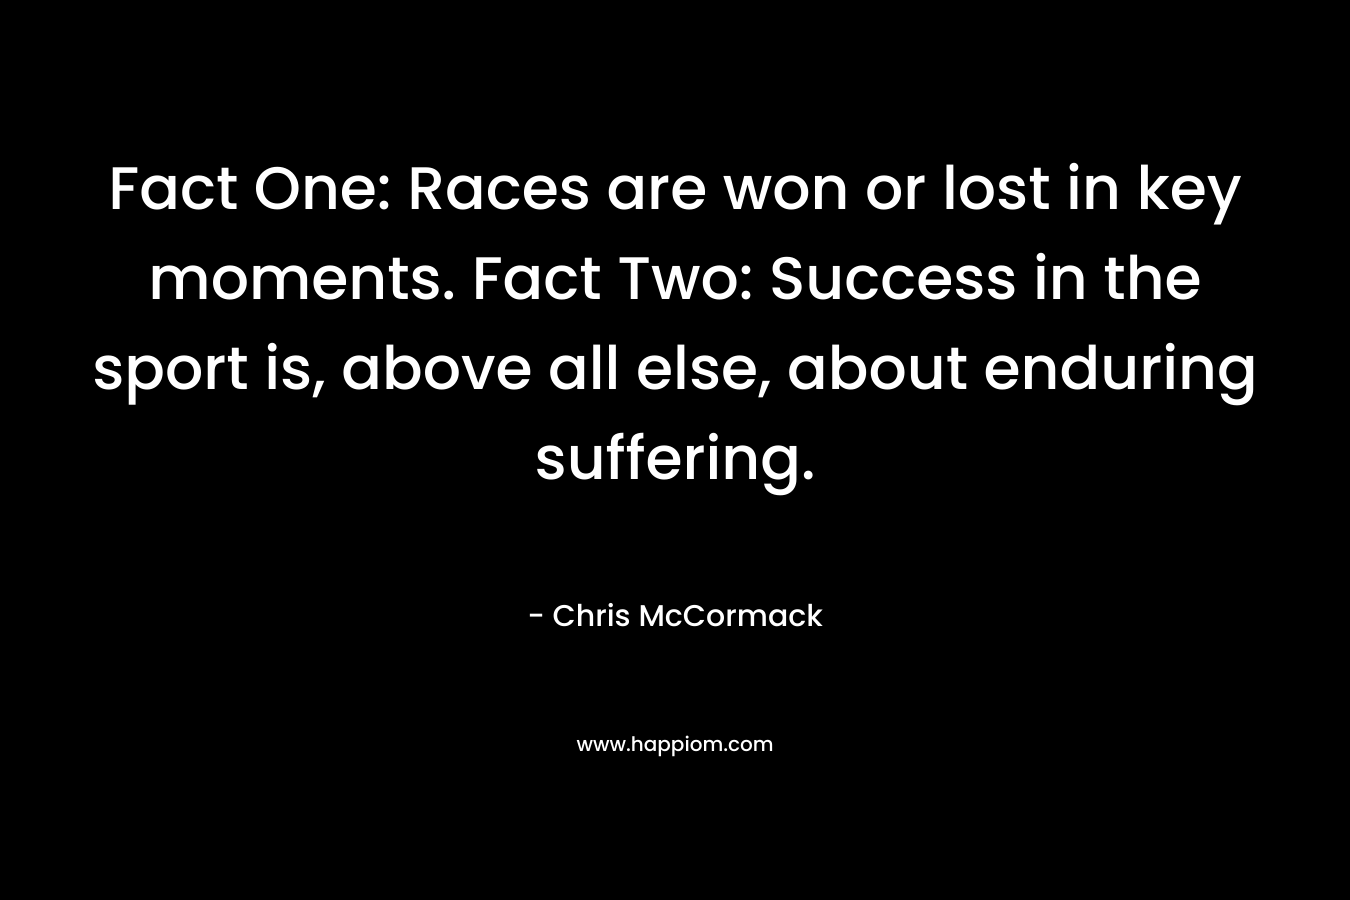 Fact One: Races are won or lost in key moments. Fact Two: Success in the sport is, above all else, about enduring suffering.